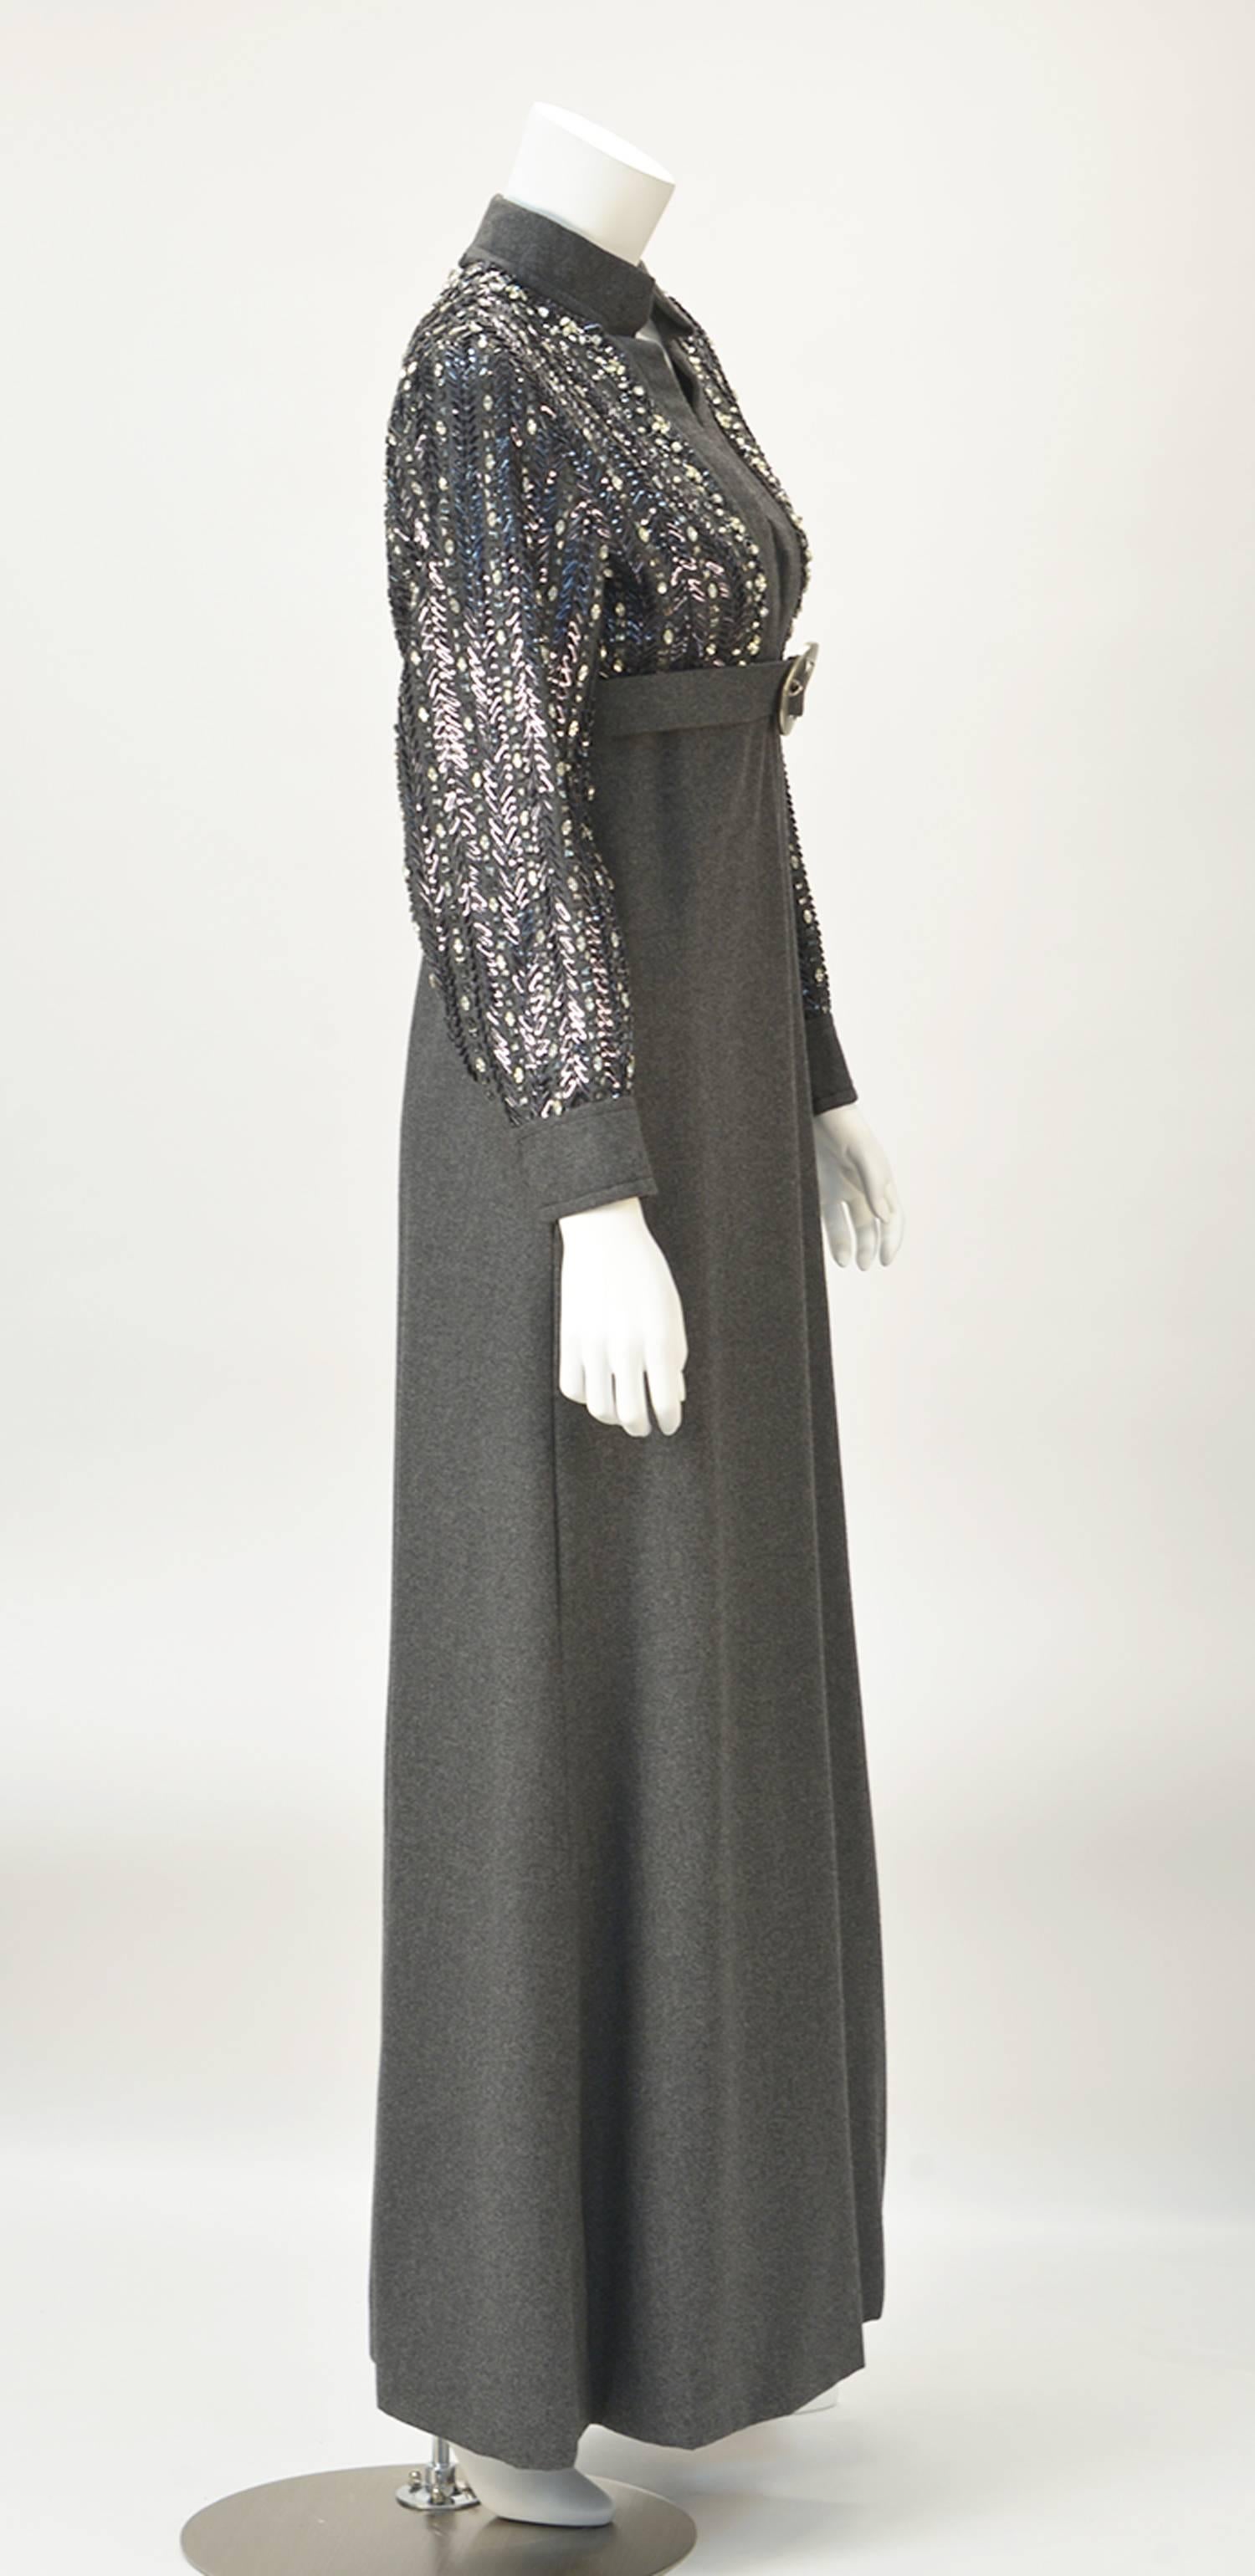 Sophisticated grey knit evening dress with edgy neckline. Long sleeves and bodice embellished with rhinestones and beading. Empire waist and matching grey belt with silver buckle. Just the right amount of sparkle for any occasion! One of our very